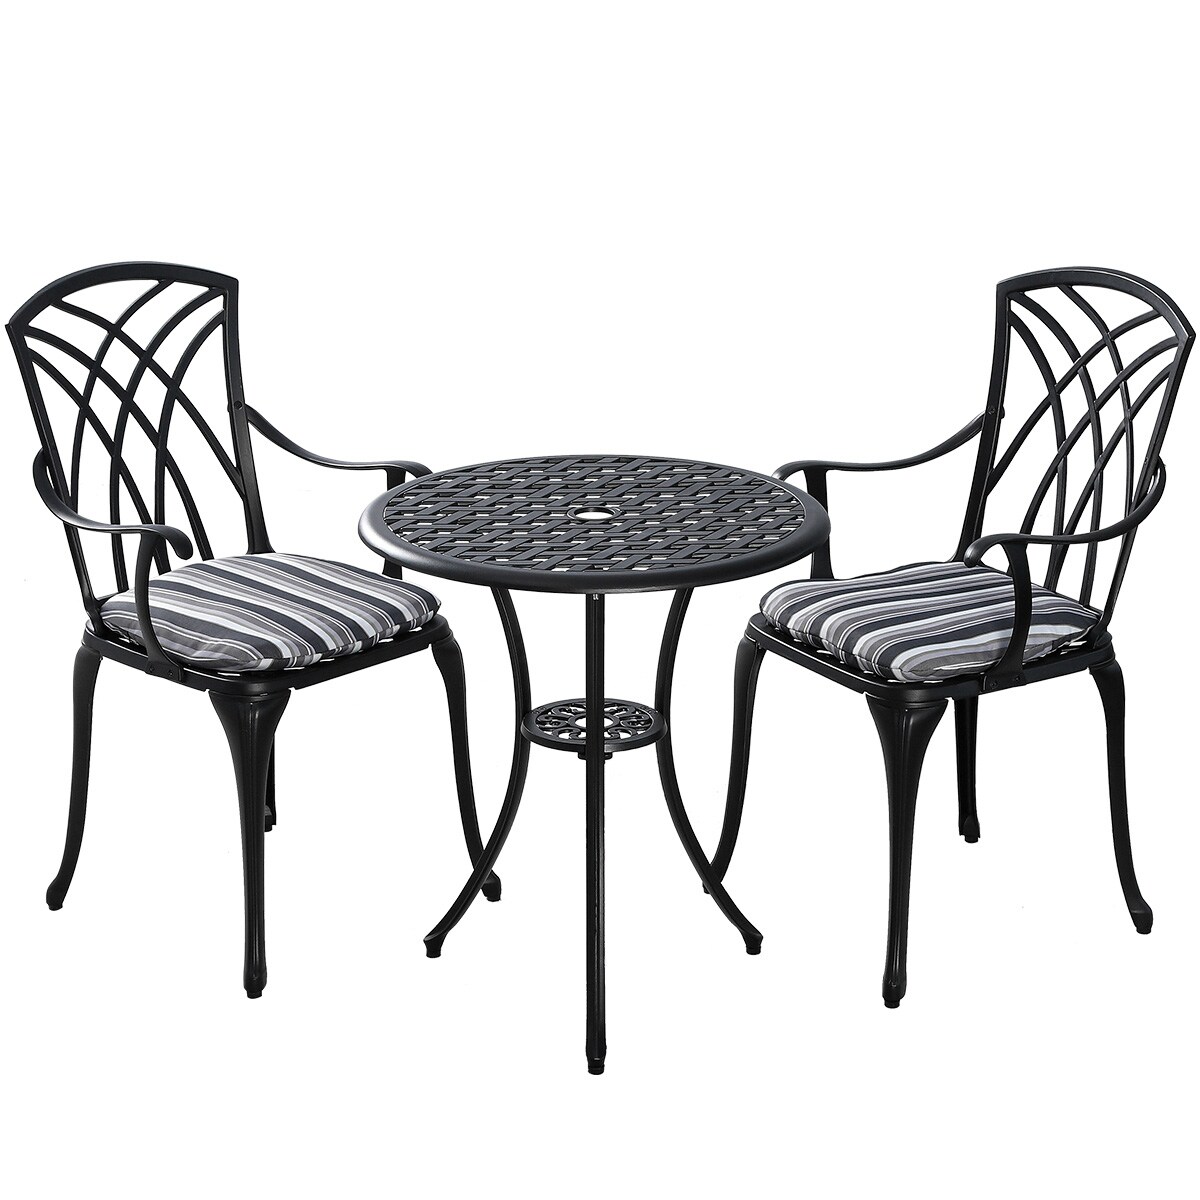 Garden Outdoor Cast Aluminium Bistro Table and 2 Arm chairs Set with Cushions 